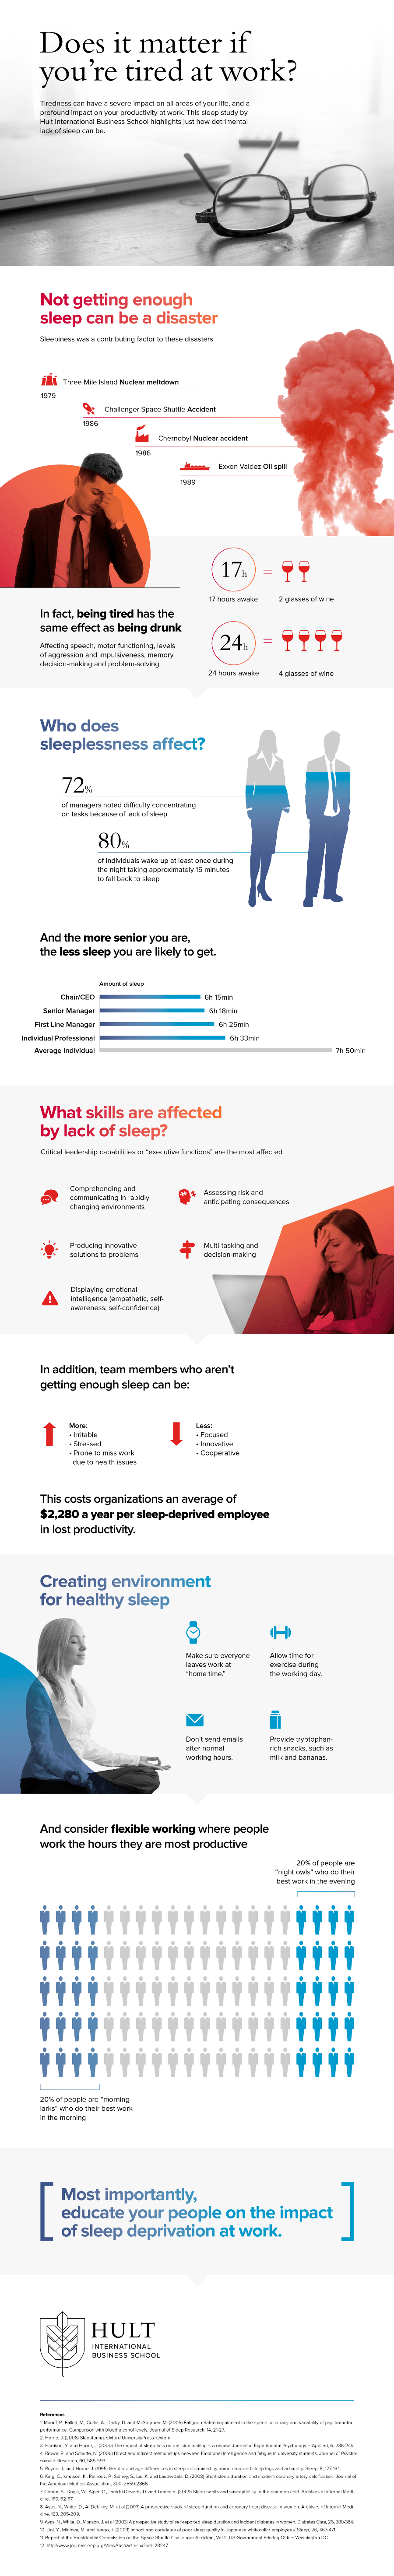 How Sleep Deprivation Affects Workers and Students Infographic